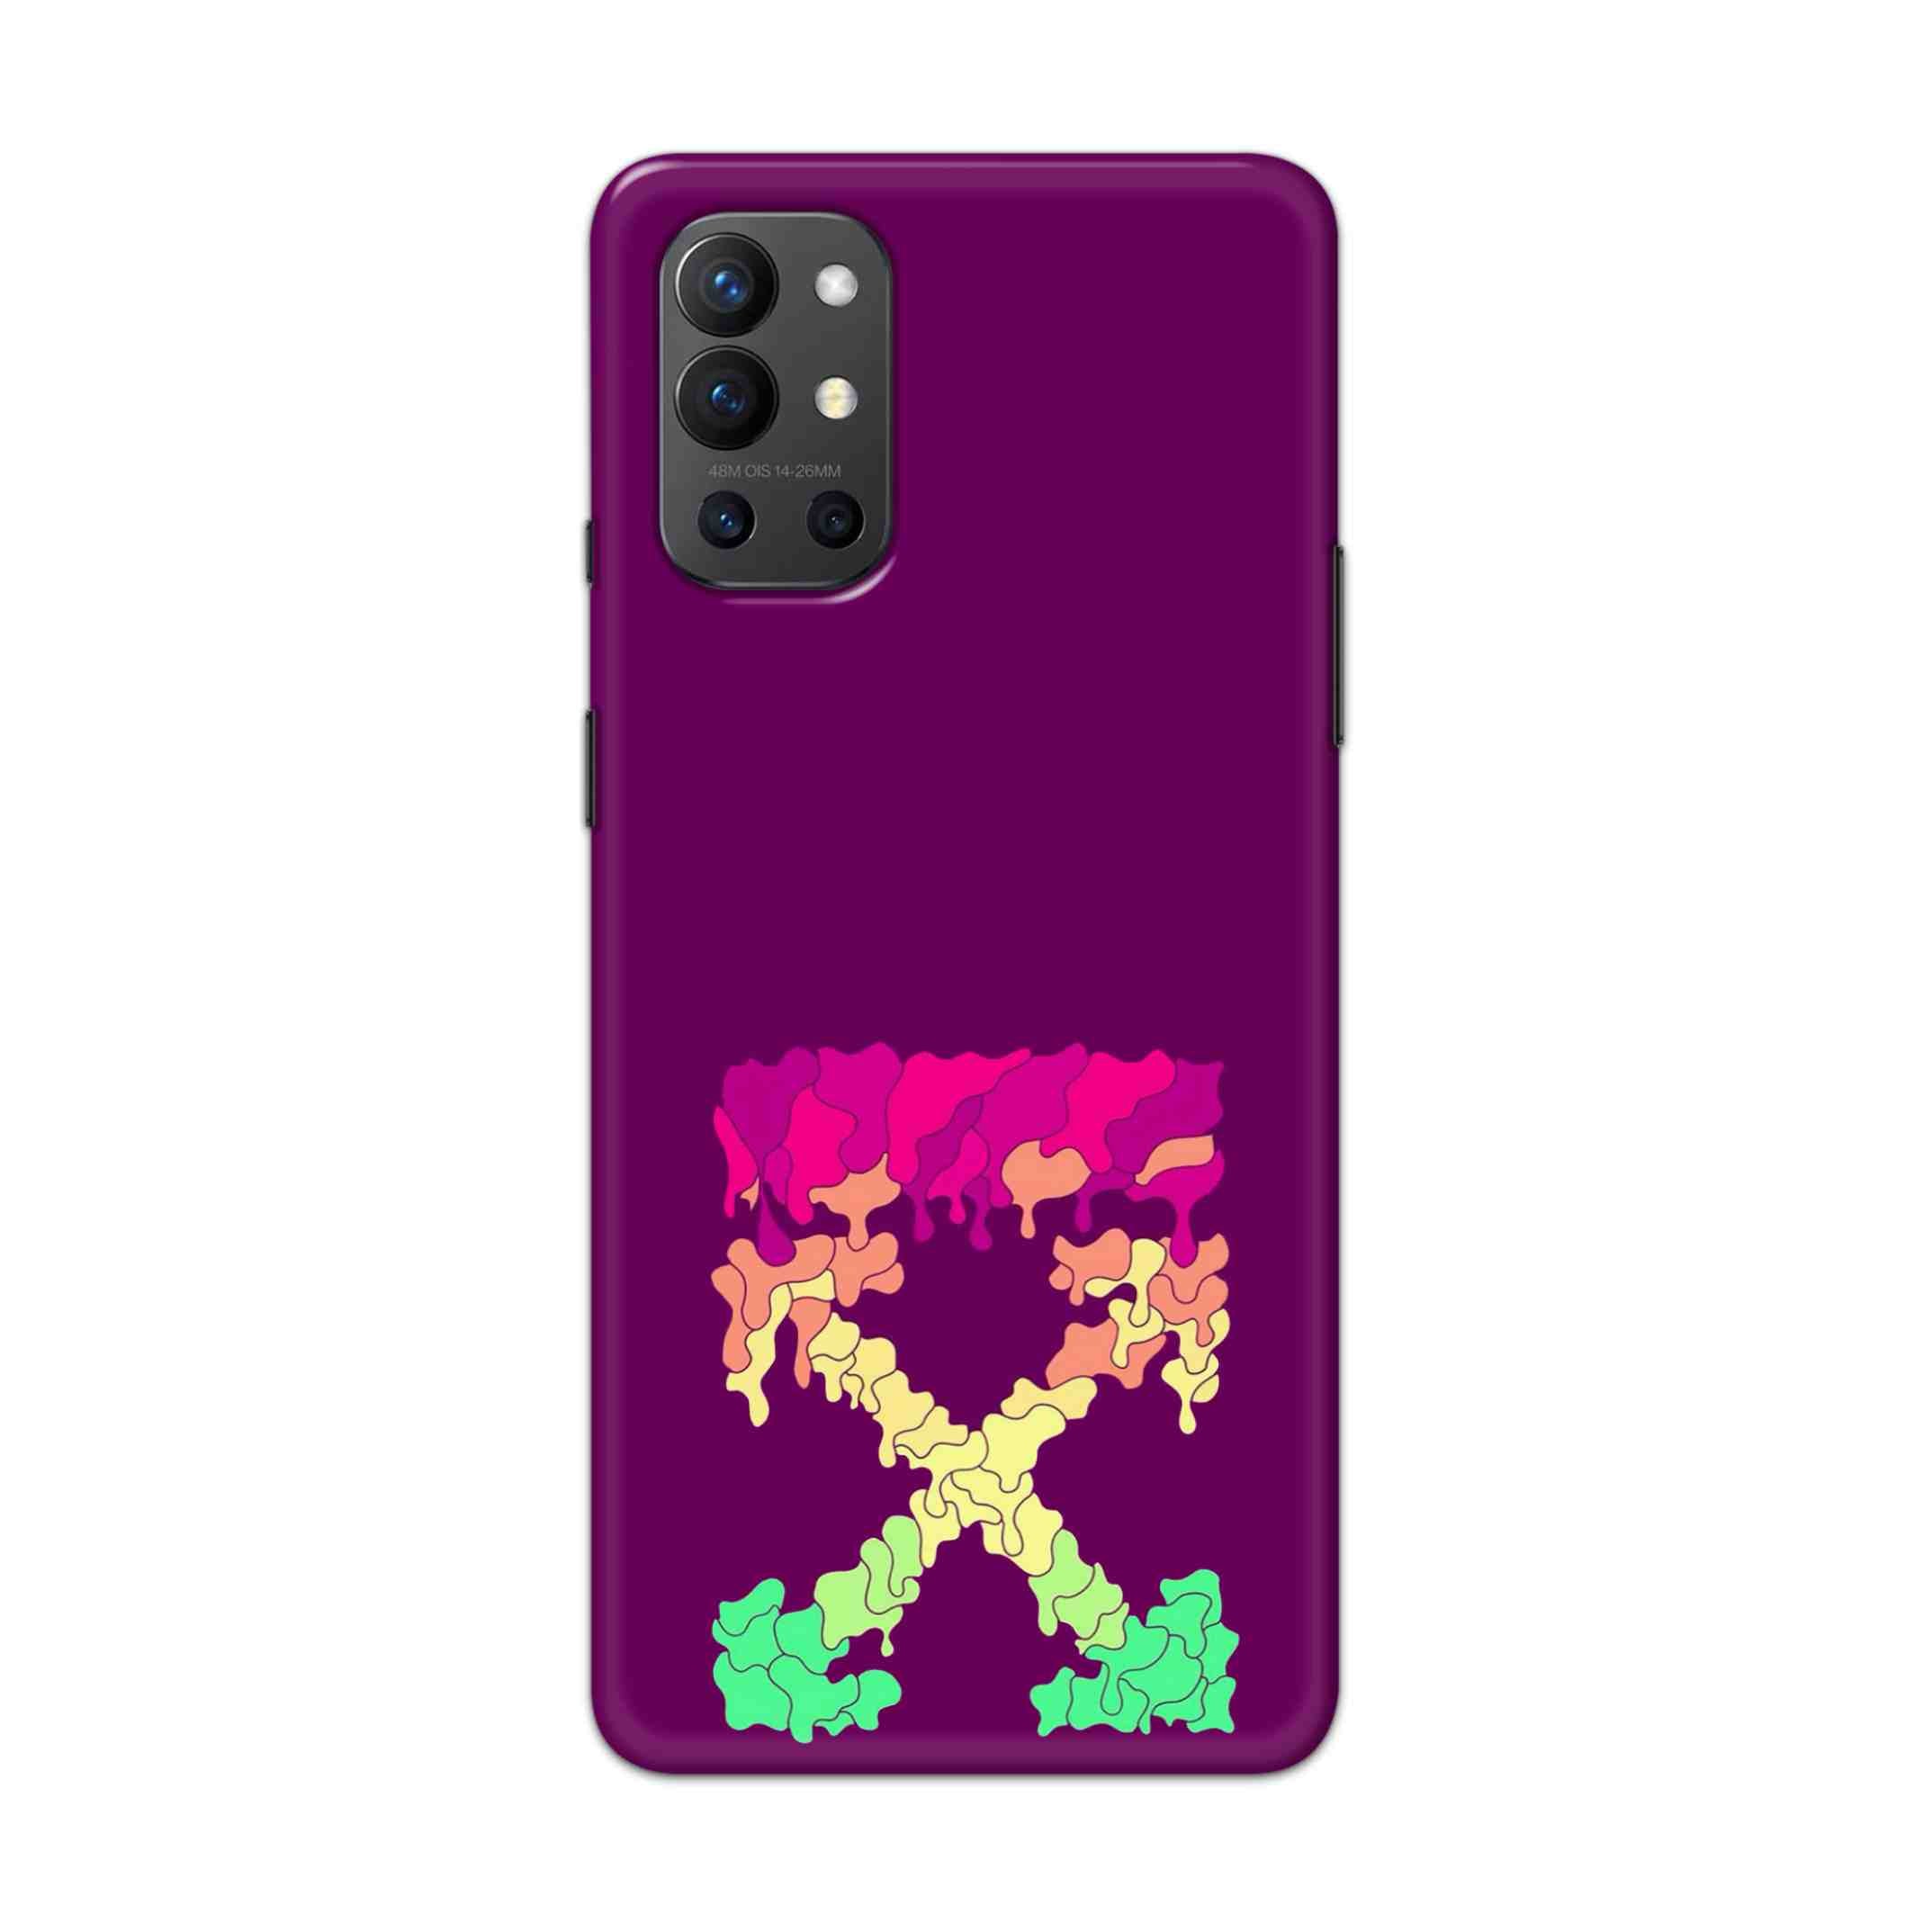 Buy X.O Hard Back Mobile Phone Case Cover For OnePlus 9R / 8T Online